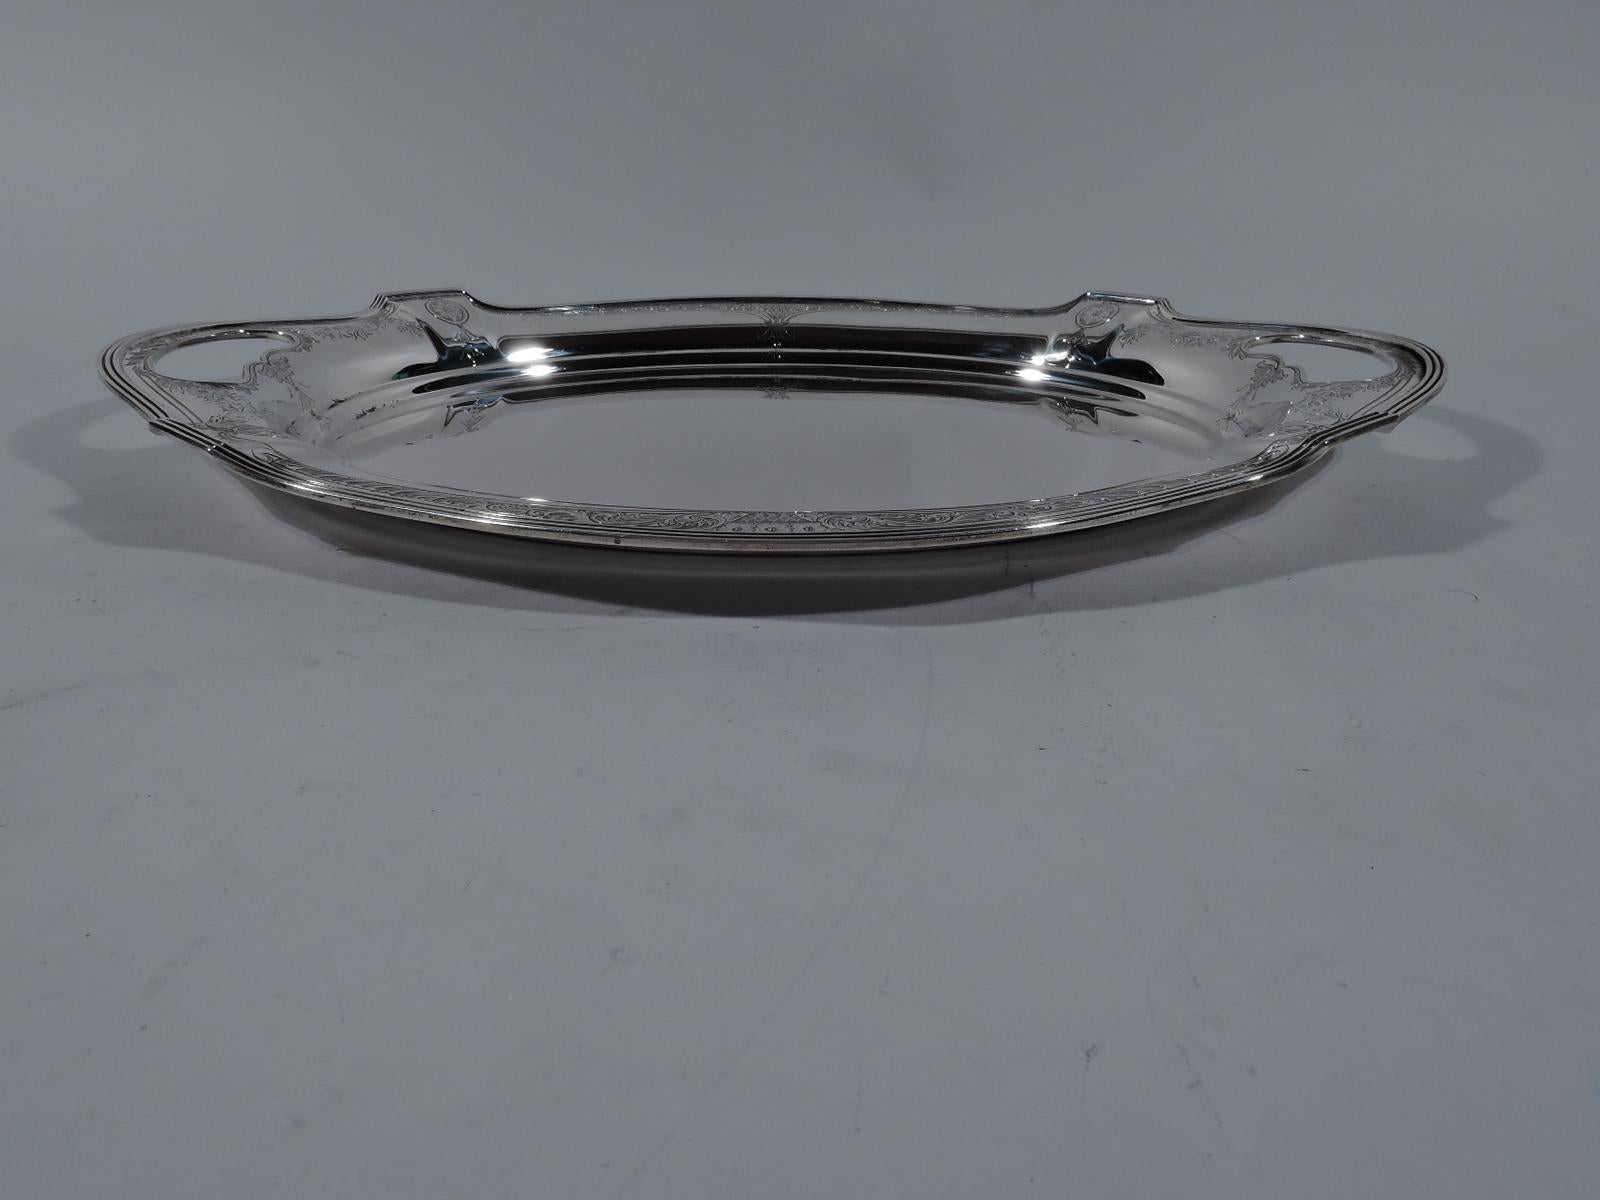 Edwardian Regency sterling silver platter tray. Made by Gorham in Providence in 1915. Oval well with paneled curvilinear shoulder and reeded rim. Cutout oval end handles. Flower baskets, paterae, garlands, and leafing scrolls engraved on shoulder.